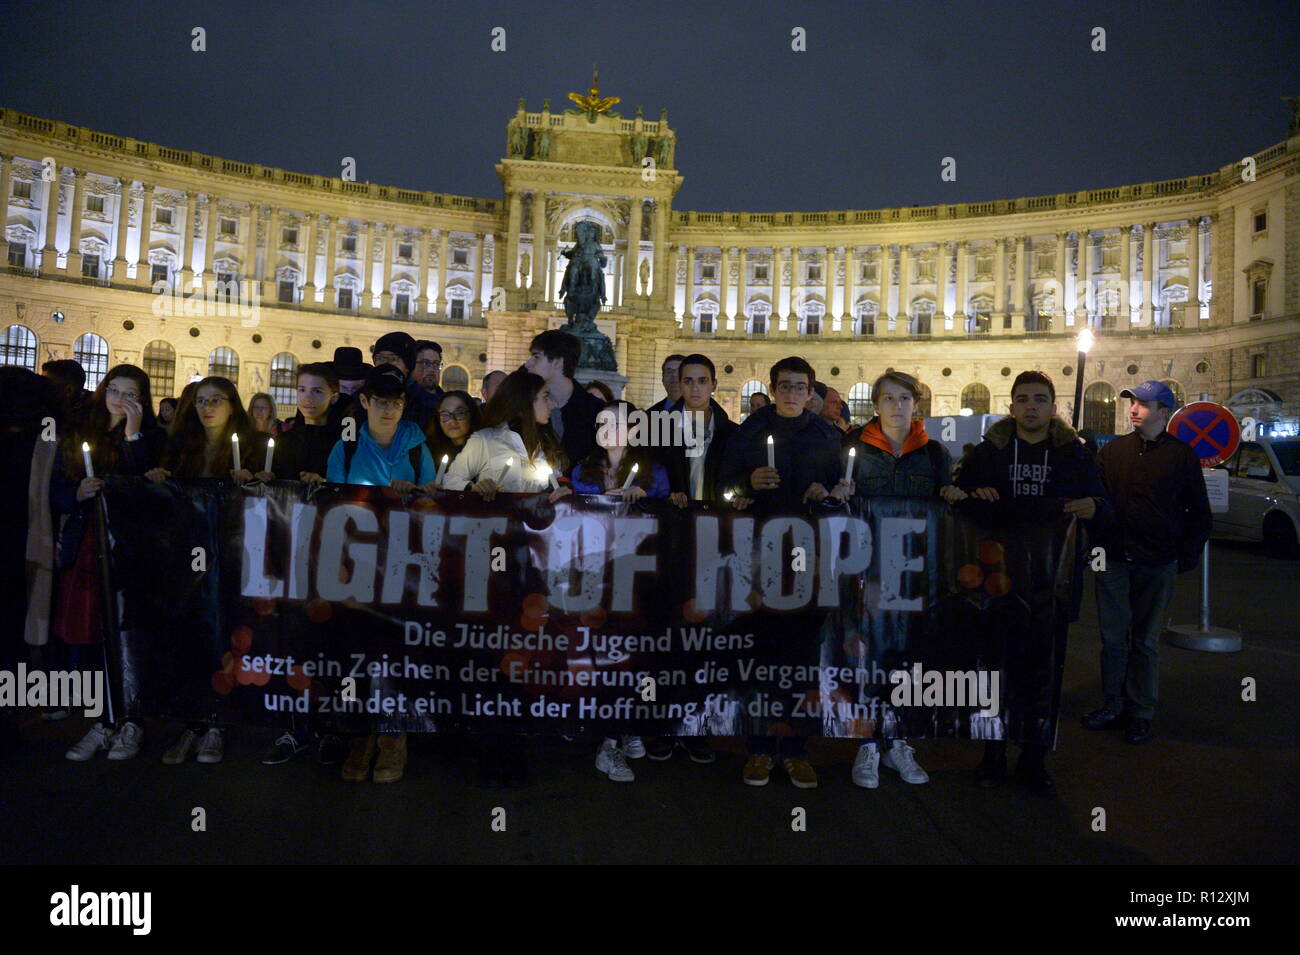 Vienna, Austria. 08. November 2018. In the commemorative year 2018, the memories of the events of the Shoah are in the foreground of the Jewish Community of Vienna. With the memorial march, the Youth Commission of the Jewish Community Vienna will light a light of hope for the future on November 8 and commemorate the November pogroms. Speech by National Council President Wolfgang Sobotka and State Secretary Karoline Edtstadler. Credit: Franz Perc / Alamy Live News Stock Photo